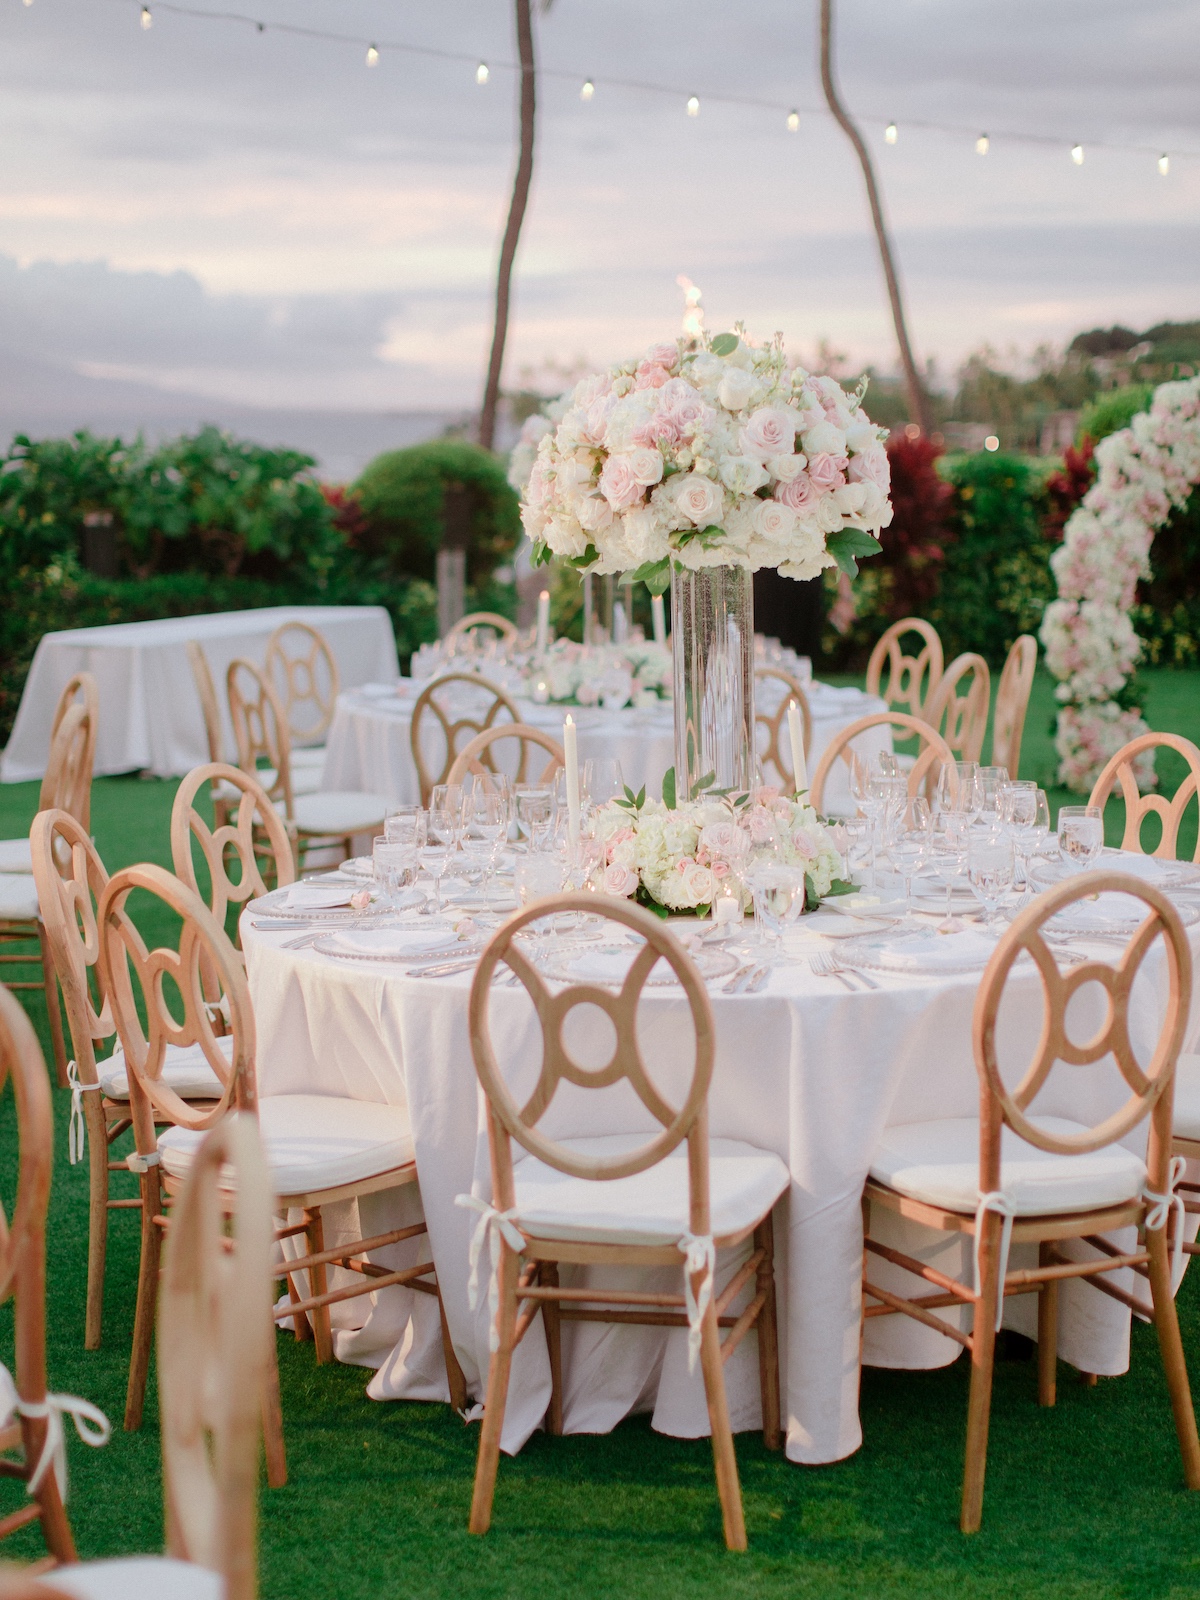 Pink and white wedding reception flowers